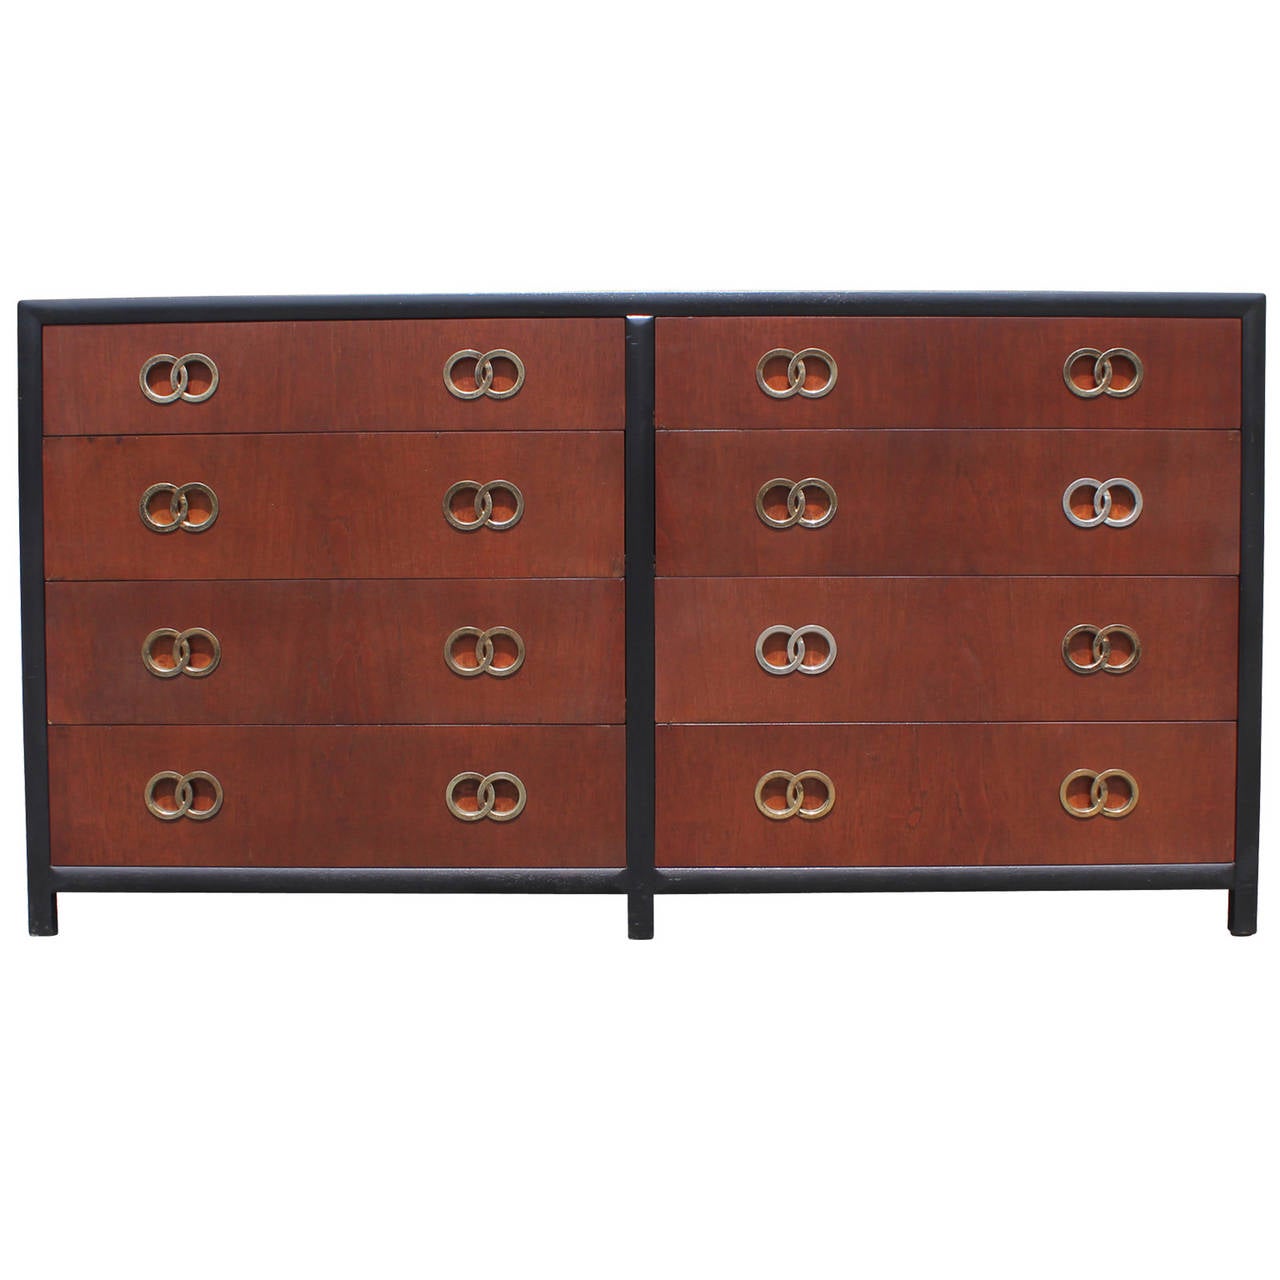 Glamorous eight-drawer dresser designed by Michael Taylor for Baker. Finished in walnut and ebony. Dresser has incredible interlocking ring pulls. Brass has a nice aged patina - handles can also be polished into chrome.